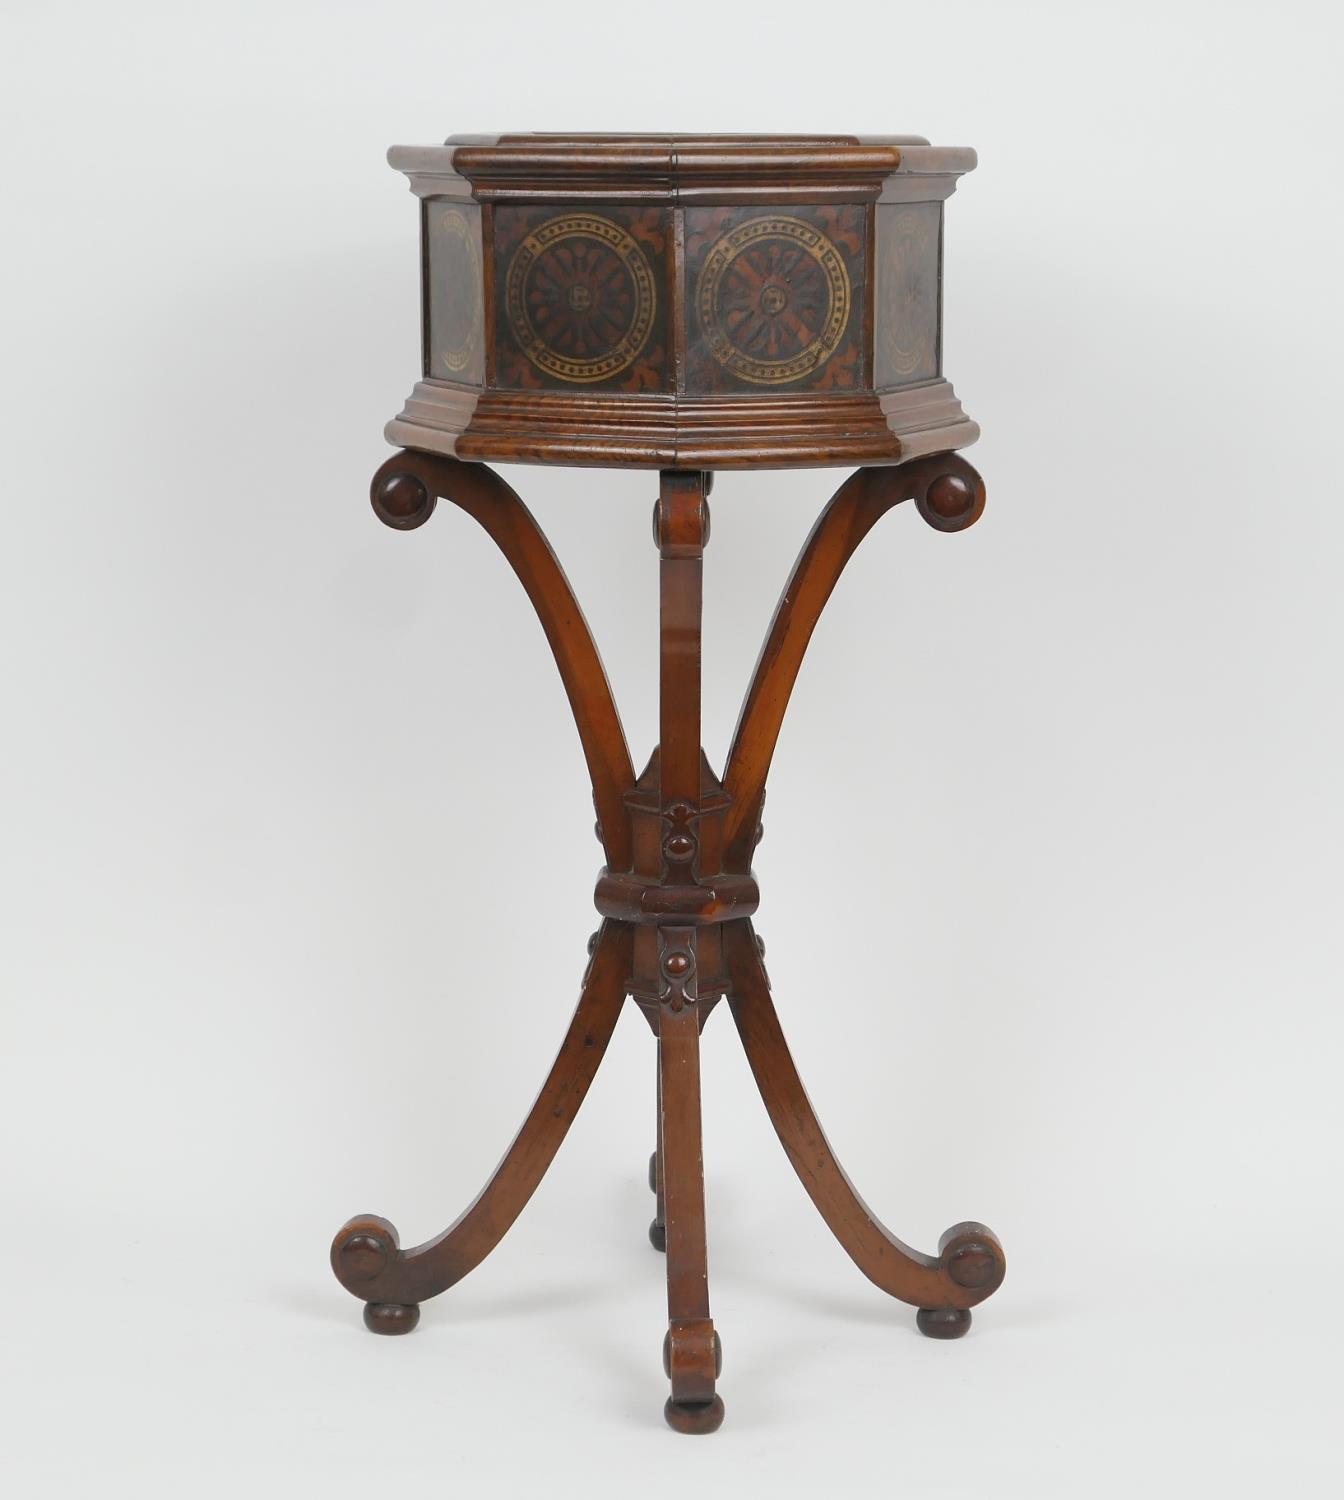 Victorian Gothic Revival pollard oak octagonal jardiniere stand, circa 1860, decorated with